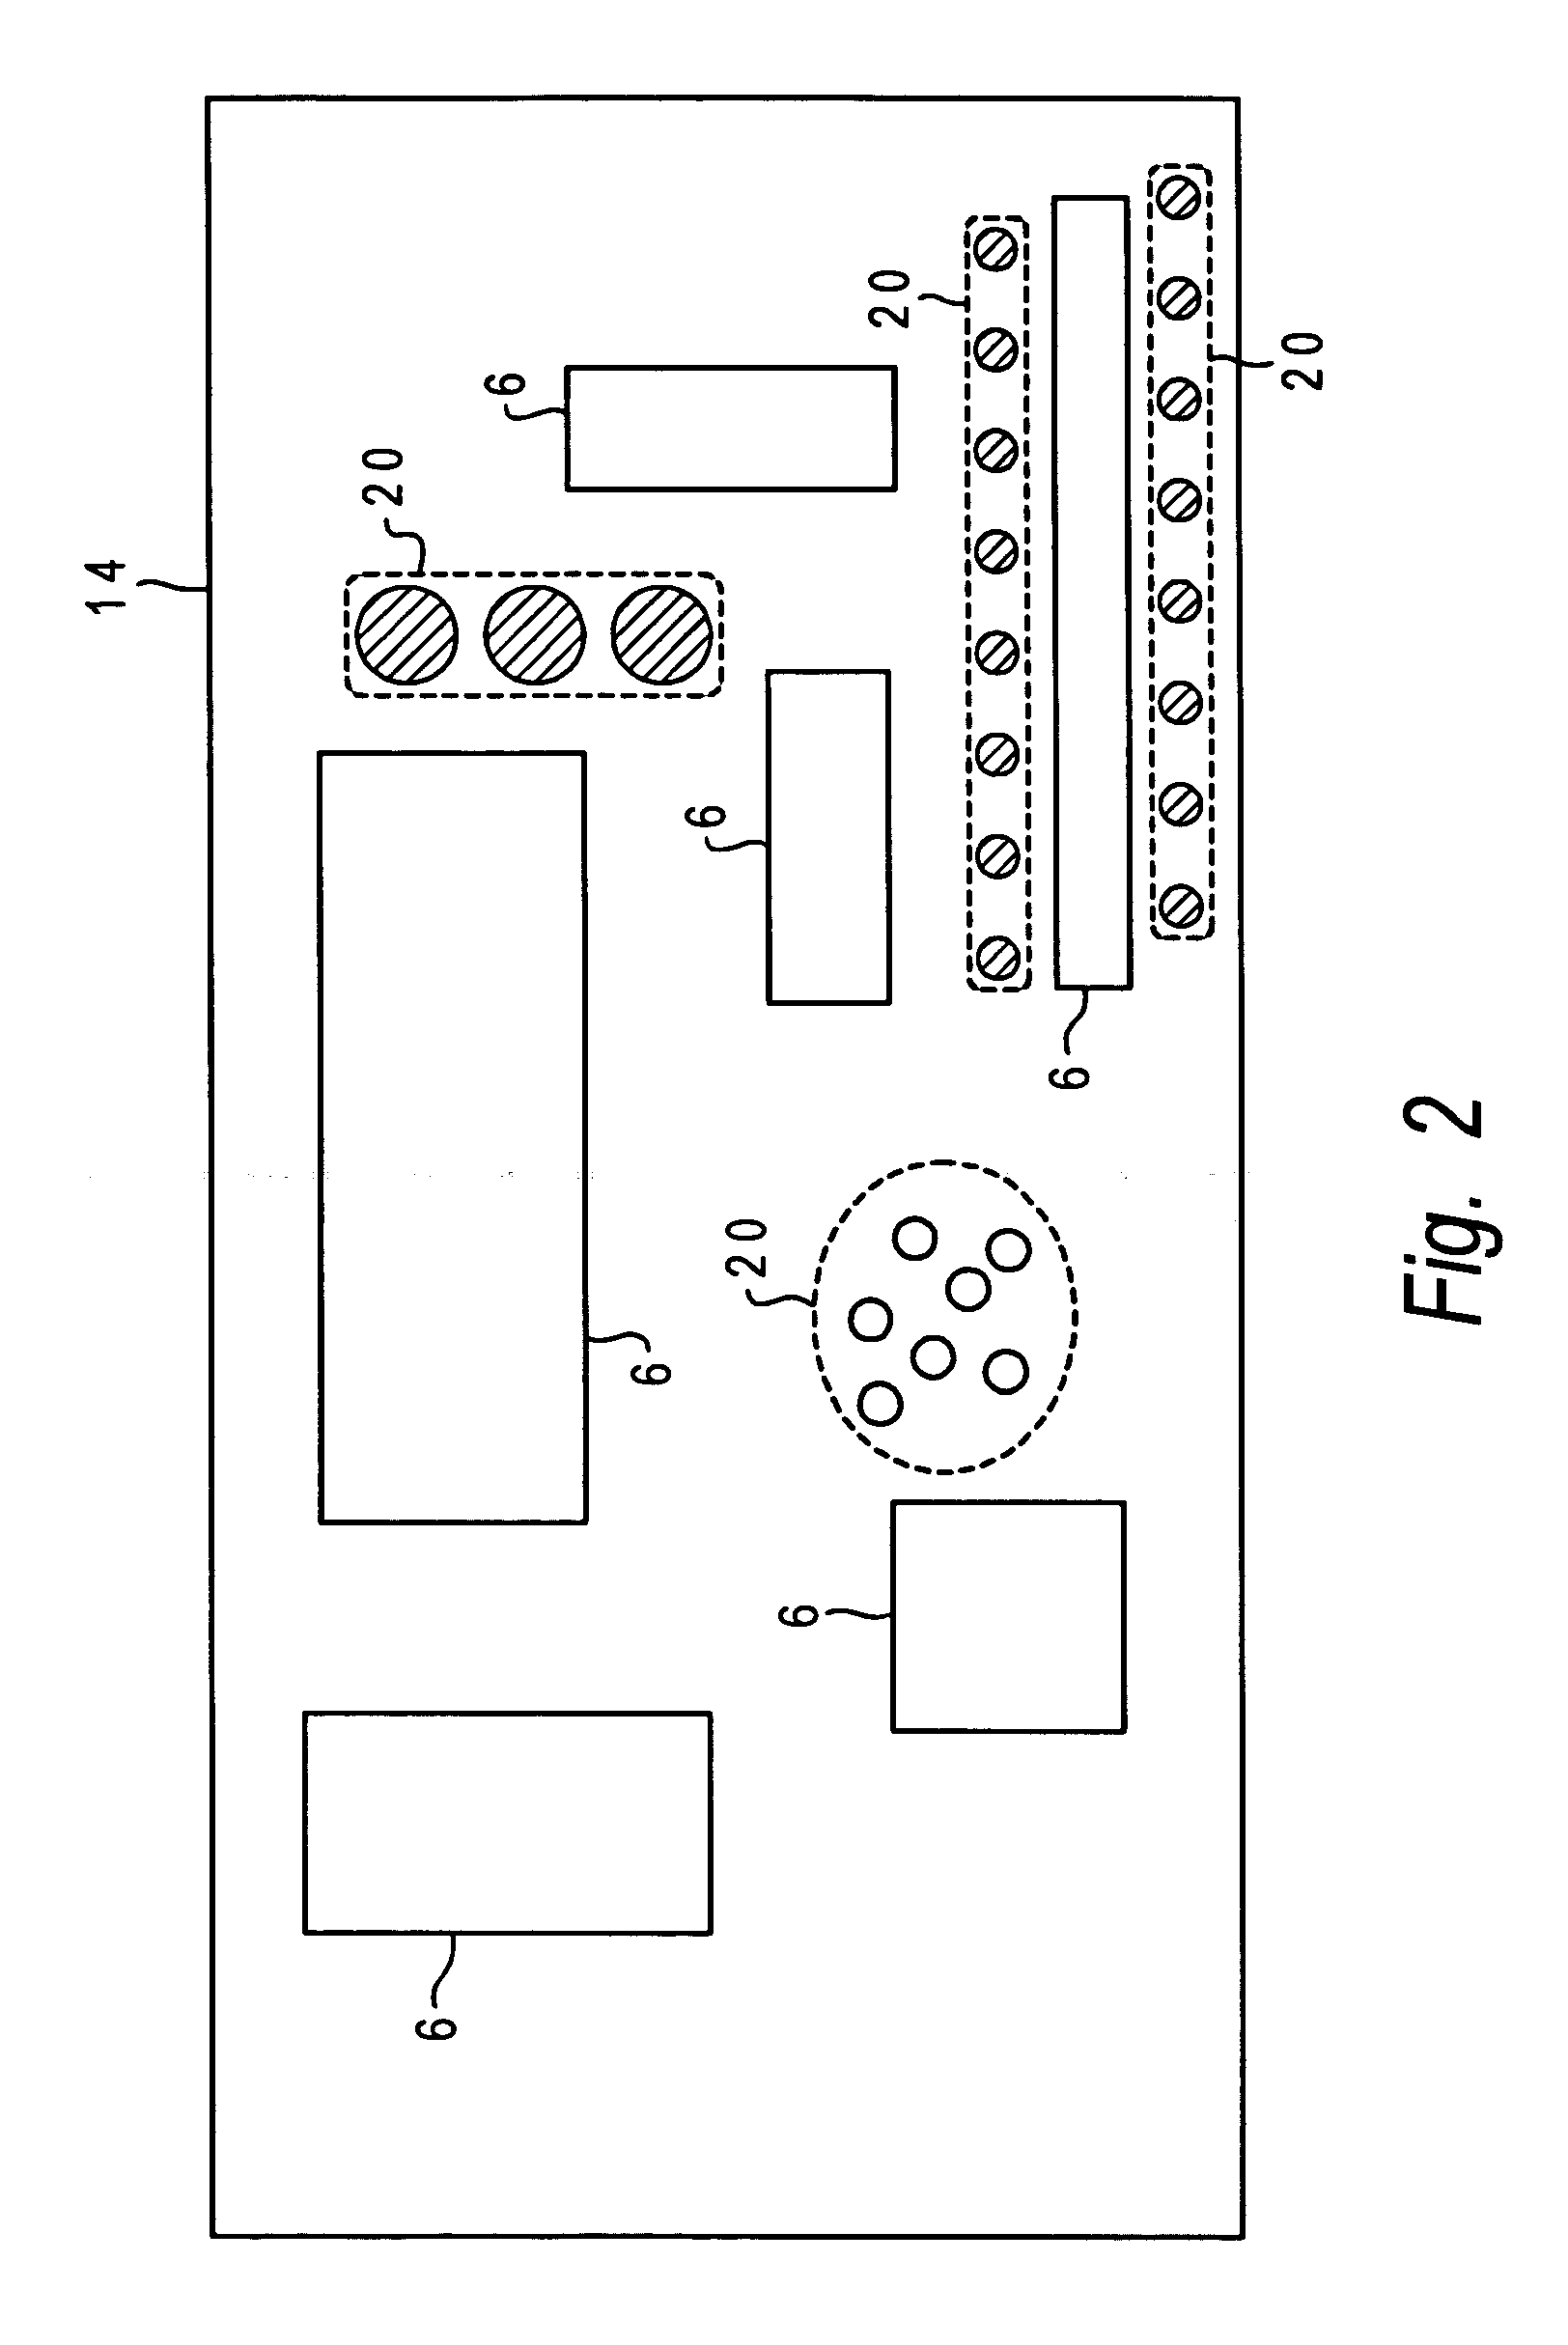 Cooling apparatus for vertically stacked printed circuit boards